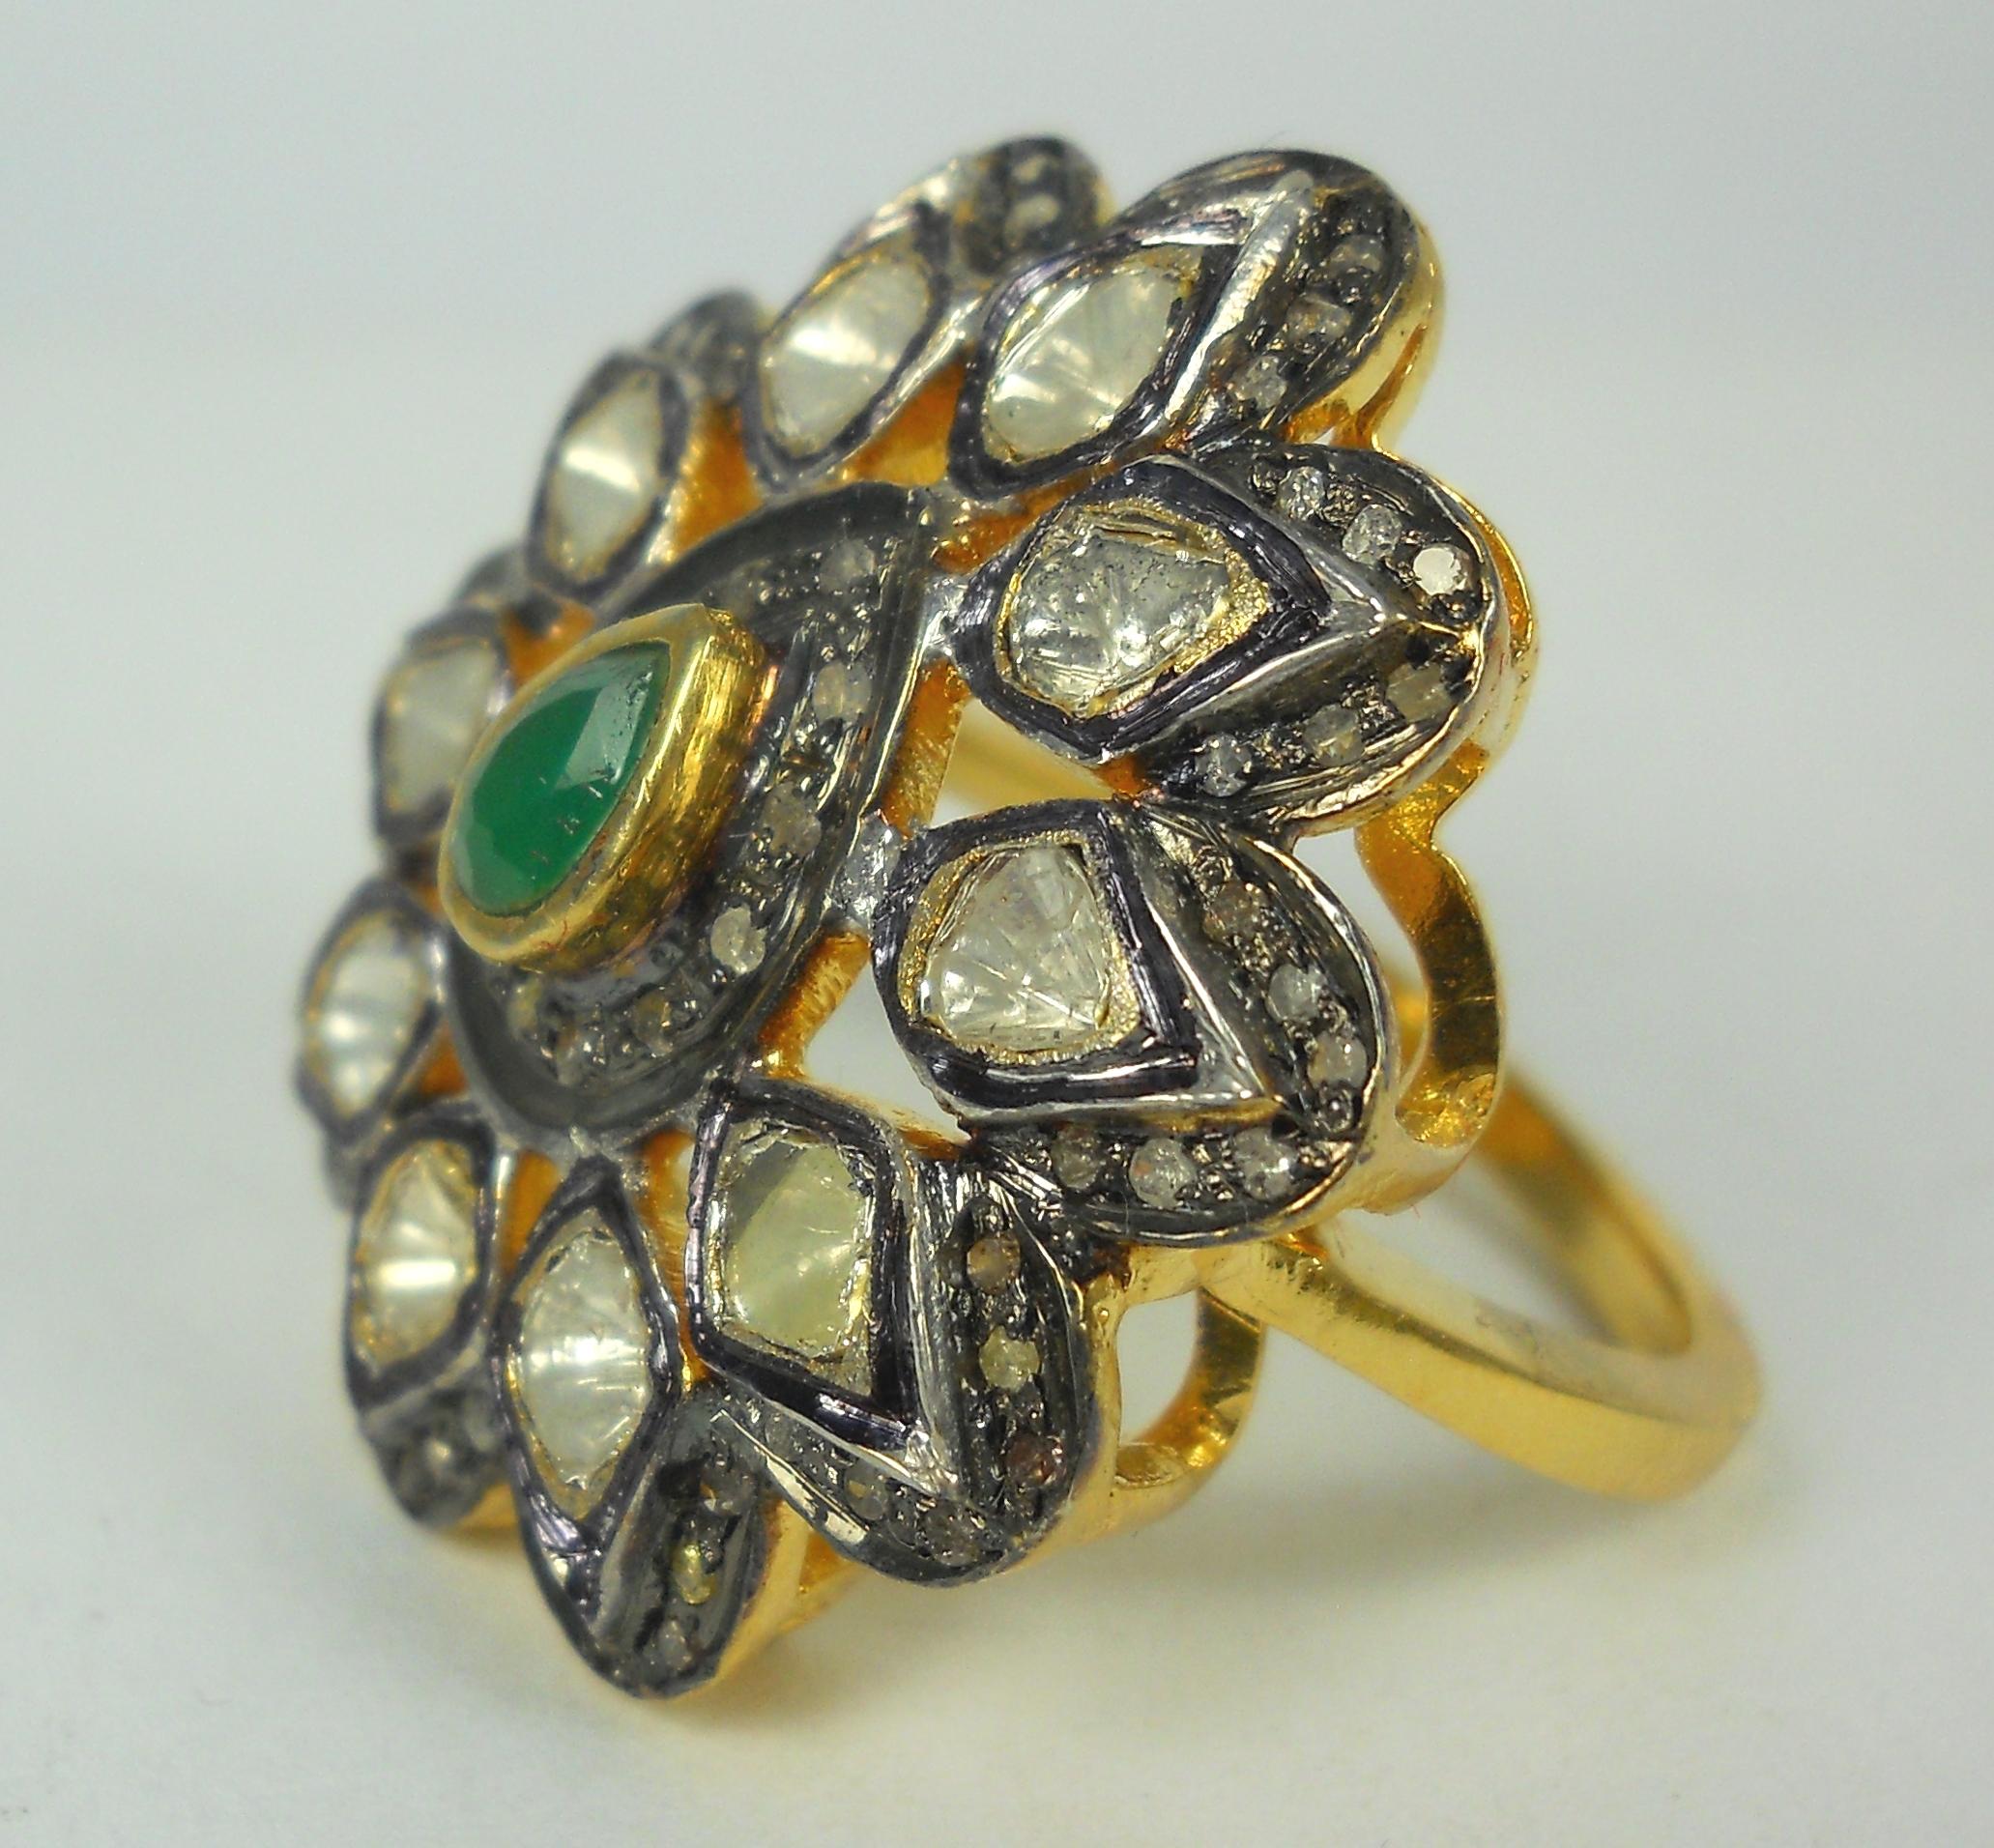 This stunning old Victorian finish ring is one of its kind.
It consists of:
Diamond- Natural Uncut and rose cut diamond
Diamond color- Tinted yellow
Metal- Silver
Metal purity- 925 silver or sterling silver
Gemstone- emerald (Natural)
Ring size- US 8